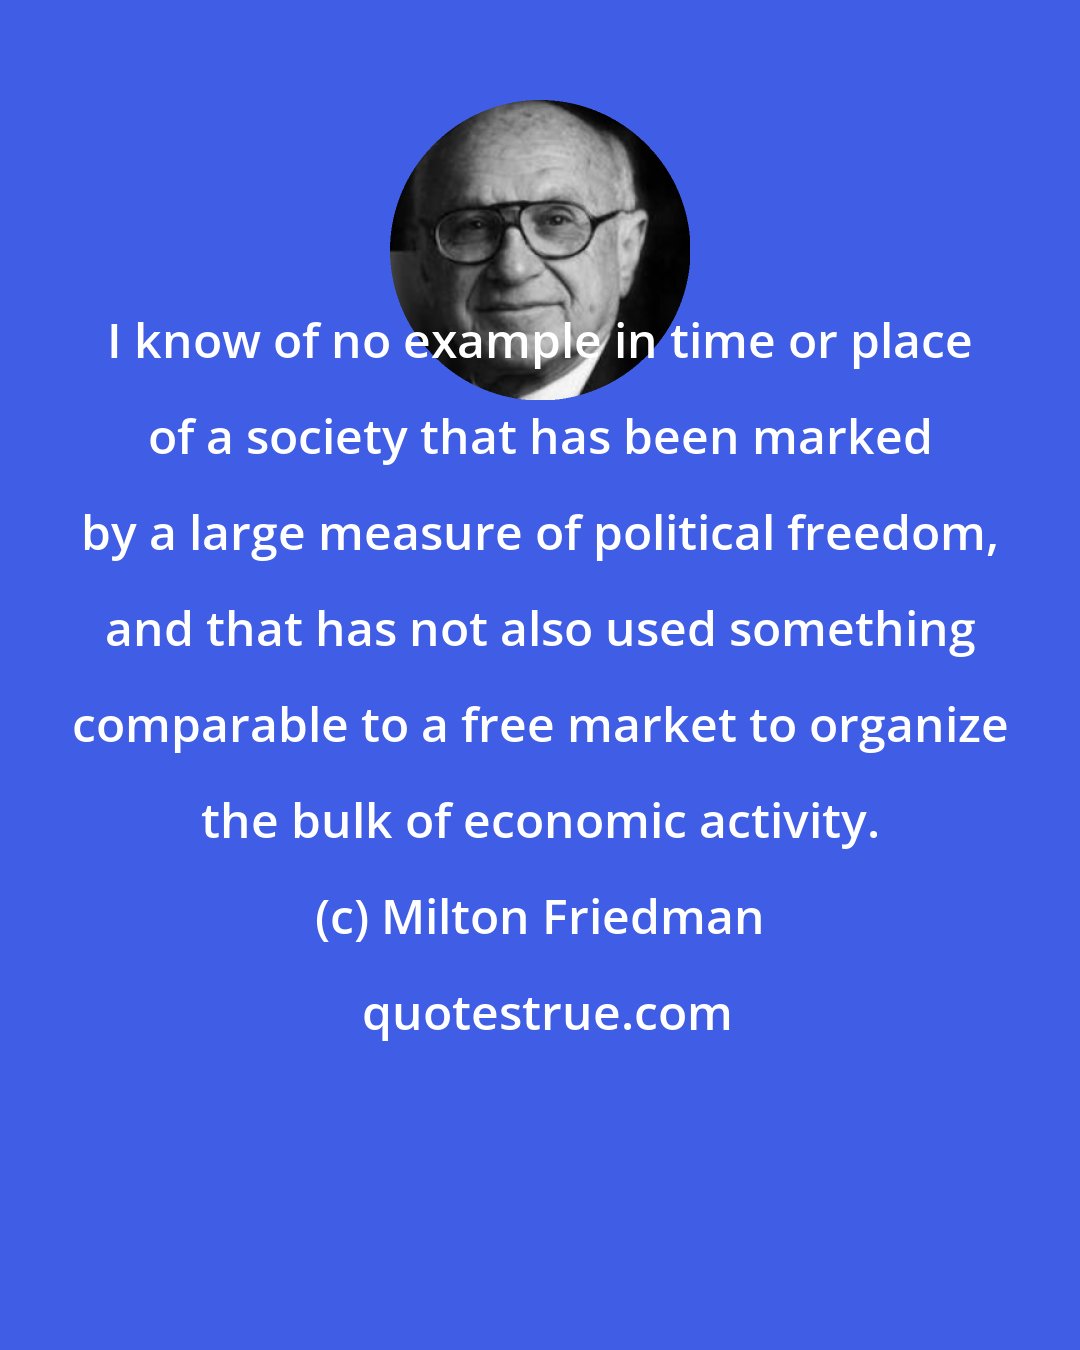 Milton Friedman: I know of no example in time or place of a society that has been marked by a large measure of political freedom, and that has not also used something comparable to a free market to organize the bulk of economic activity.